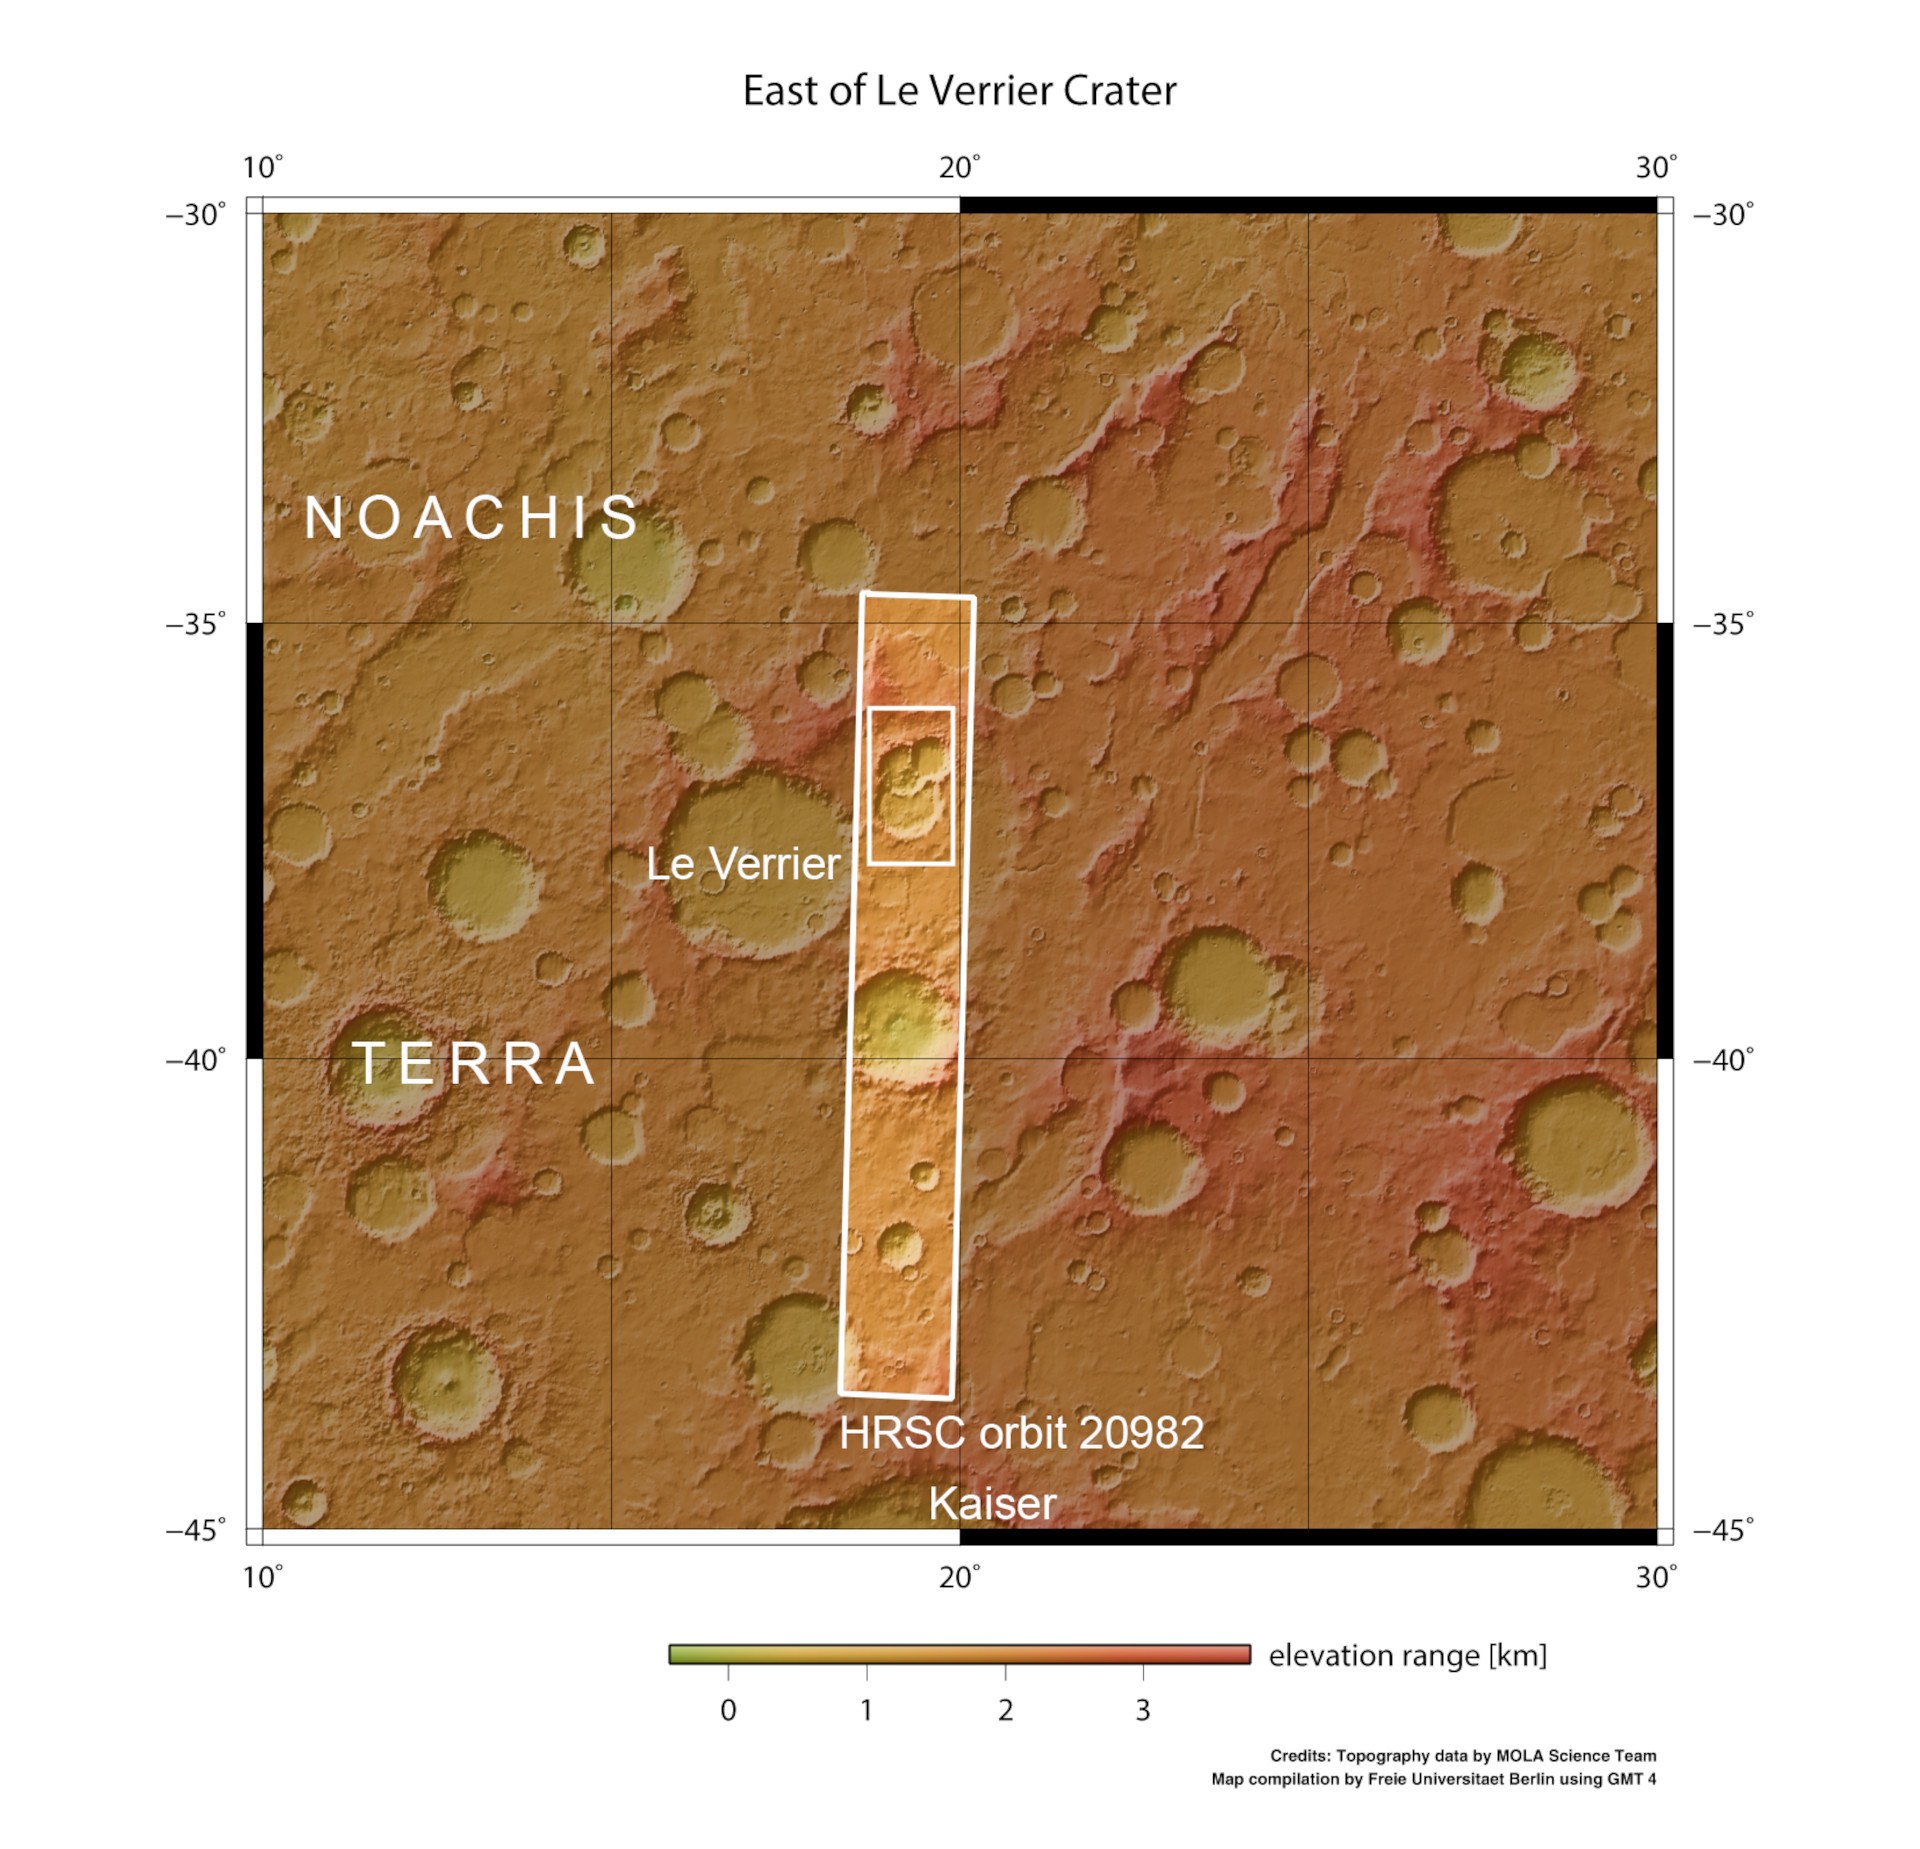 Topographic overview map of the surroundings of a crater triplet in Noachis Terra